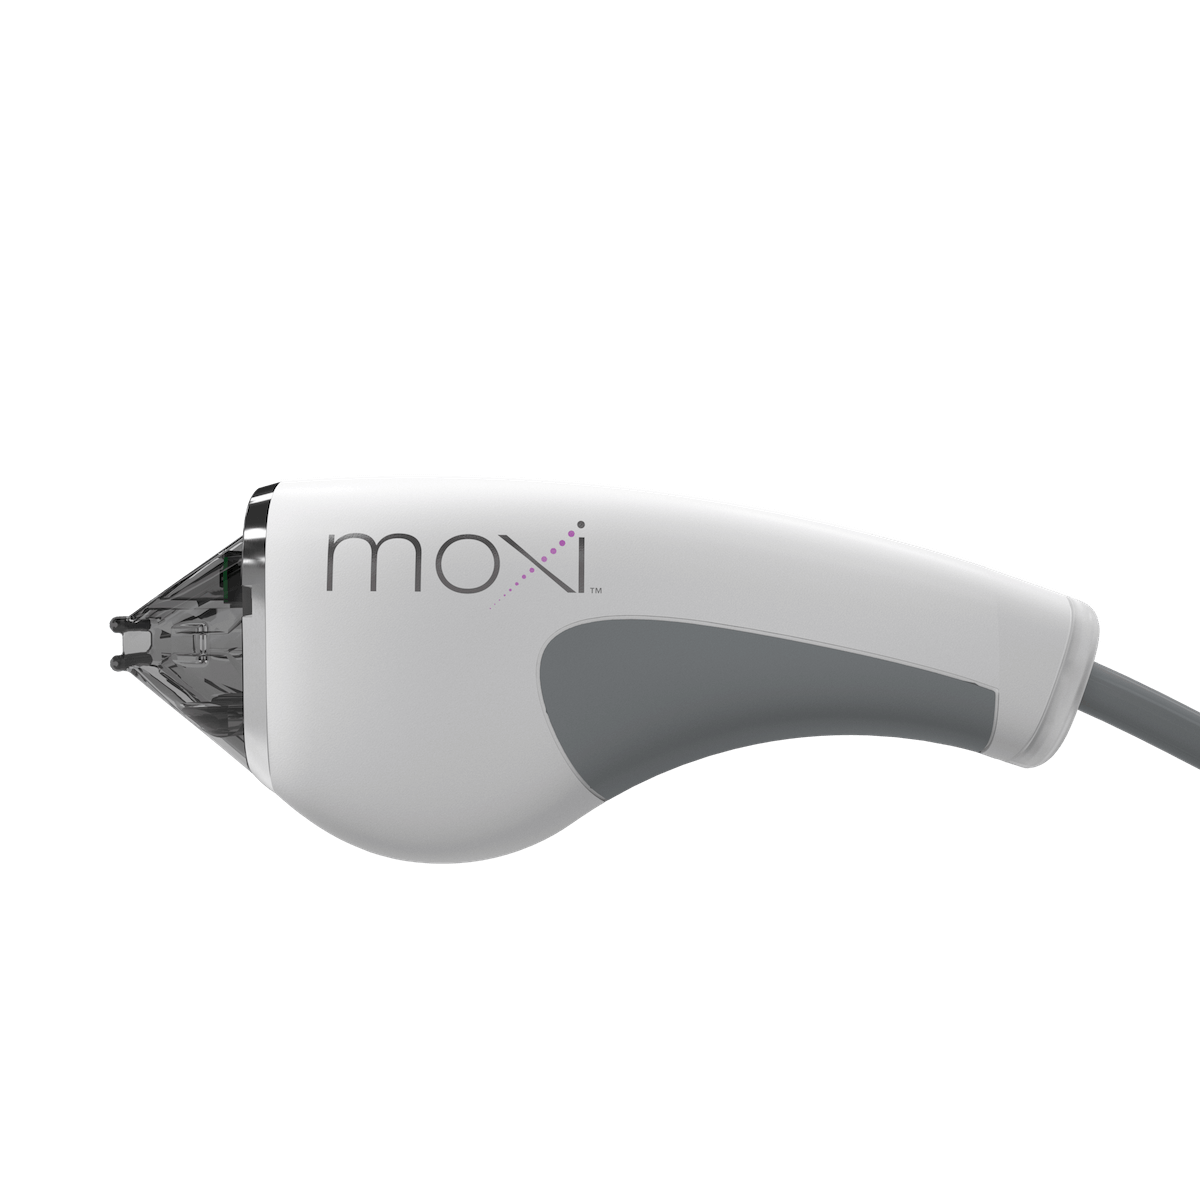 MOXI Laser treatments in the Baltimore area